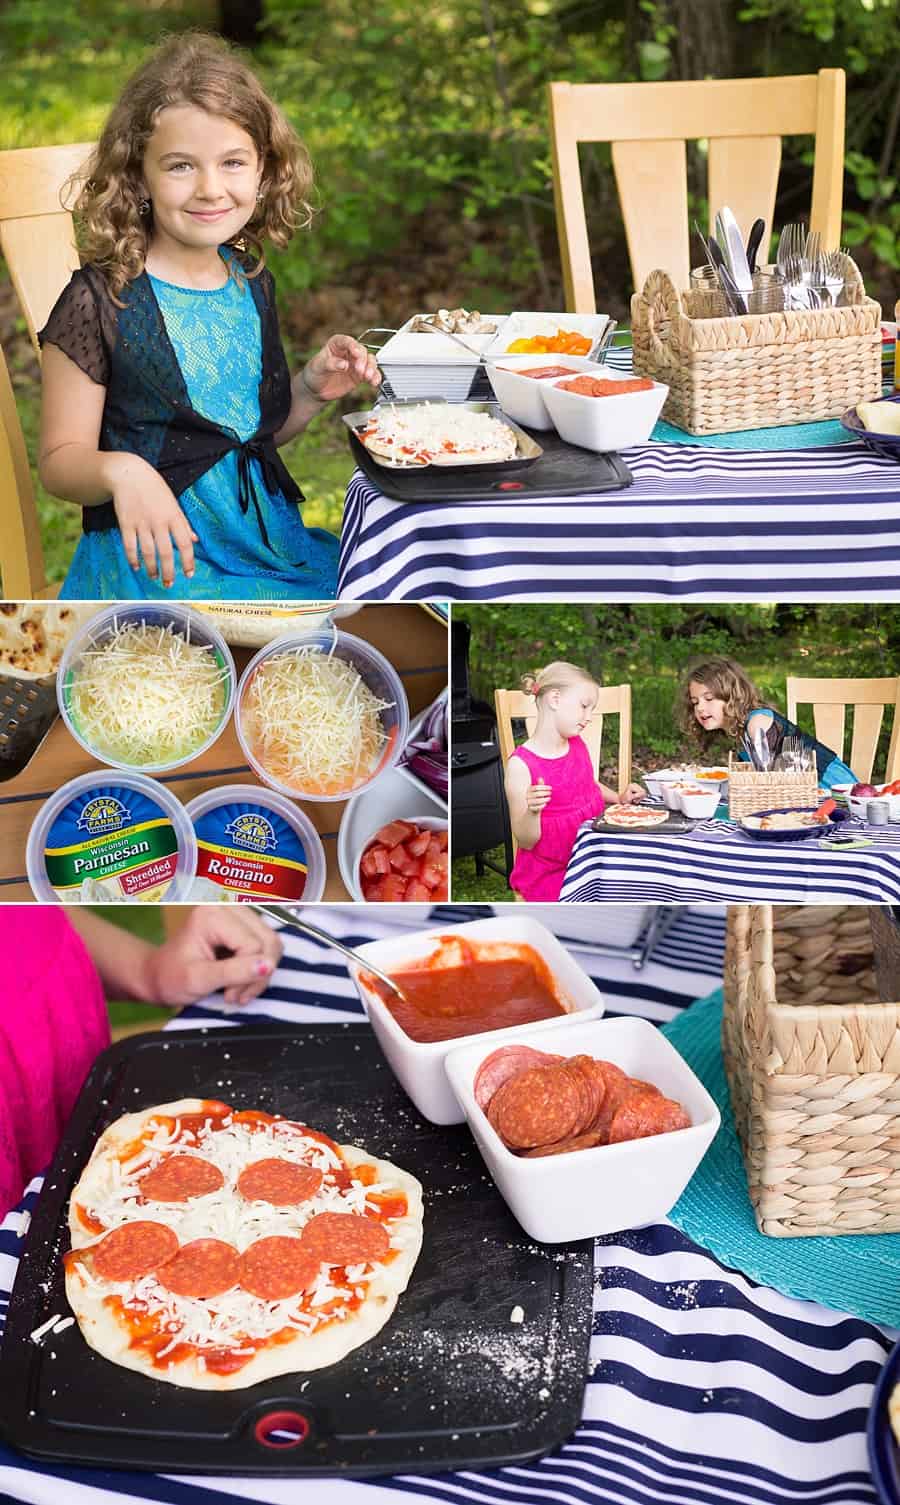 Grilled Pizza 101: This Simple Grilled Pizza Hack is Insanely Delicious *Love this easy idea and recipe. My husband and kid love these topping combos. Love the idea of calling it a Pizza Party. 